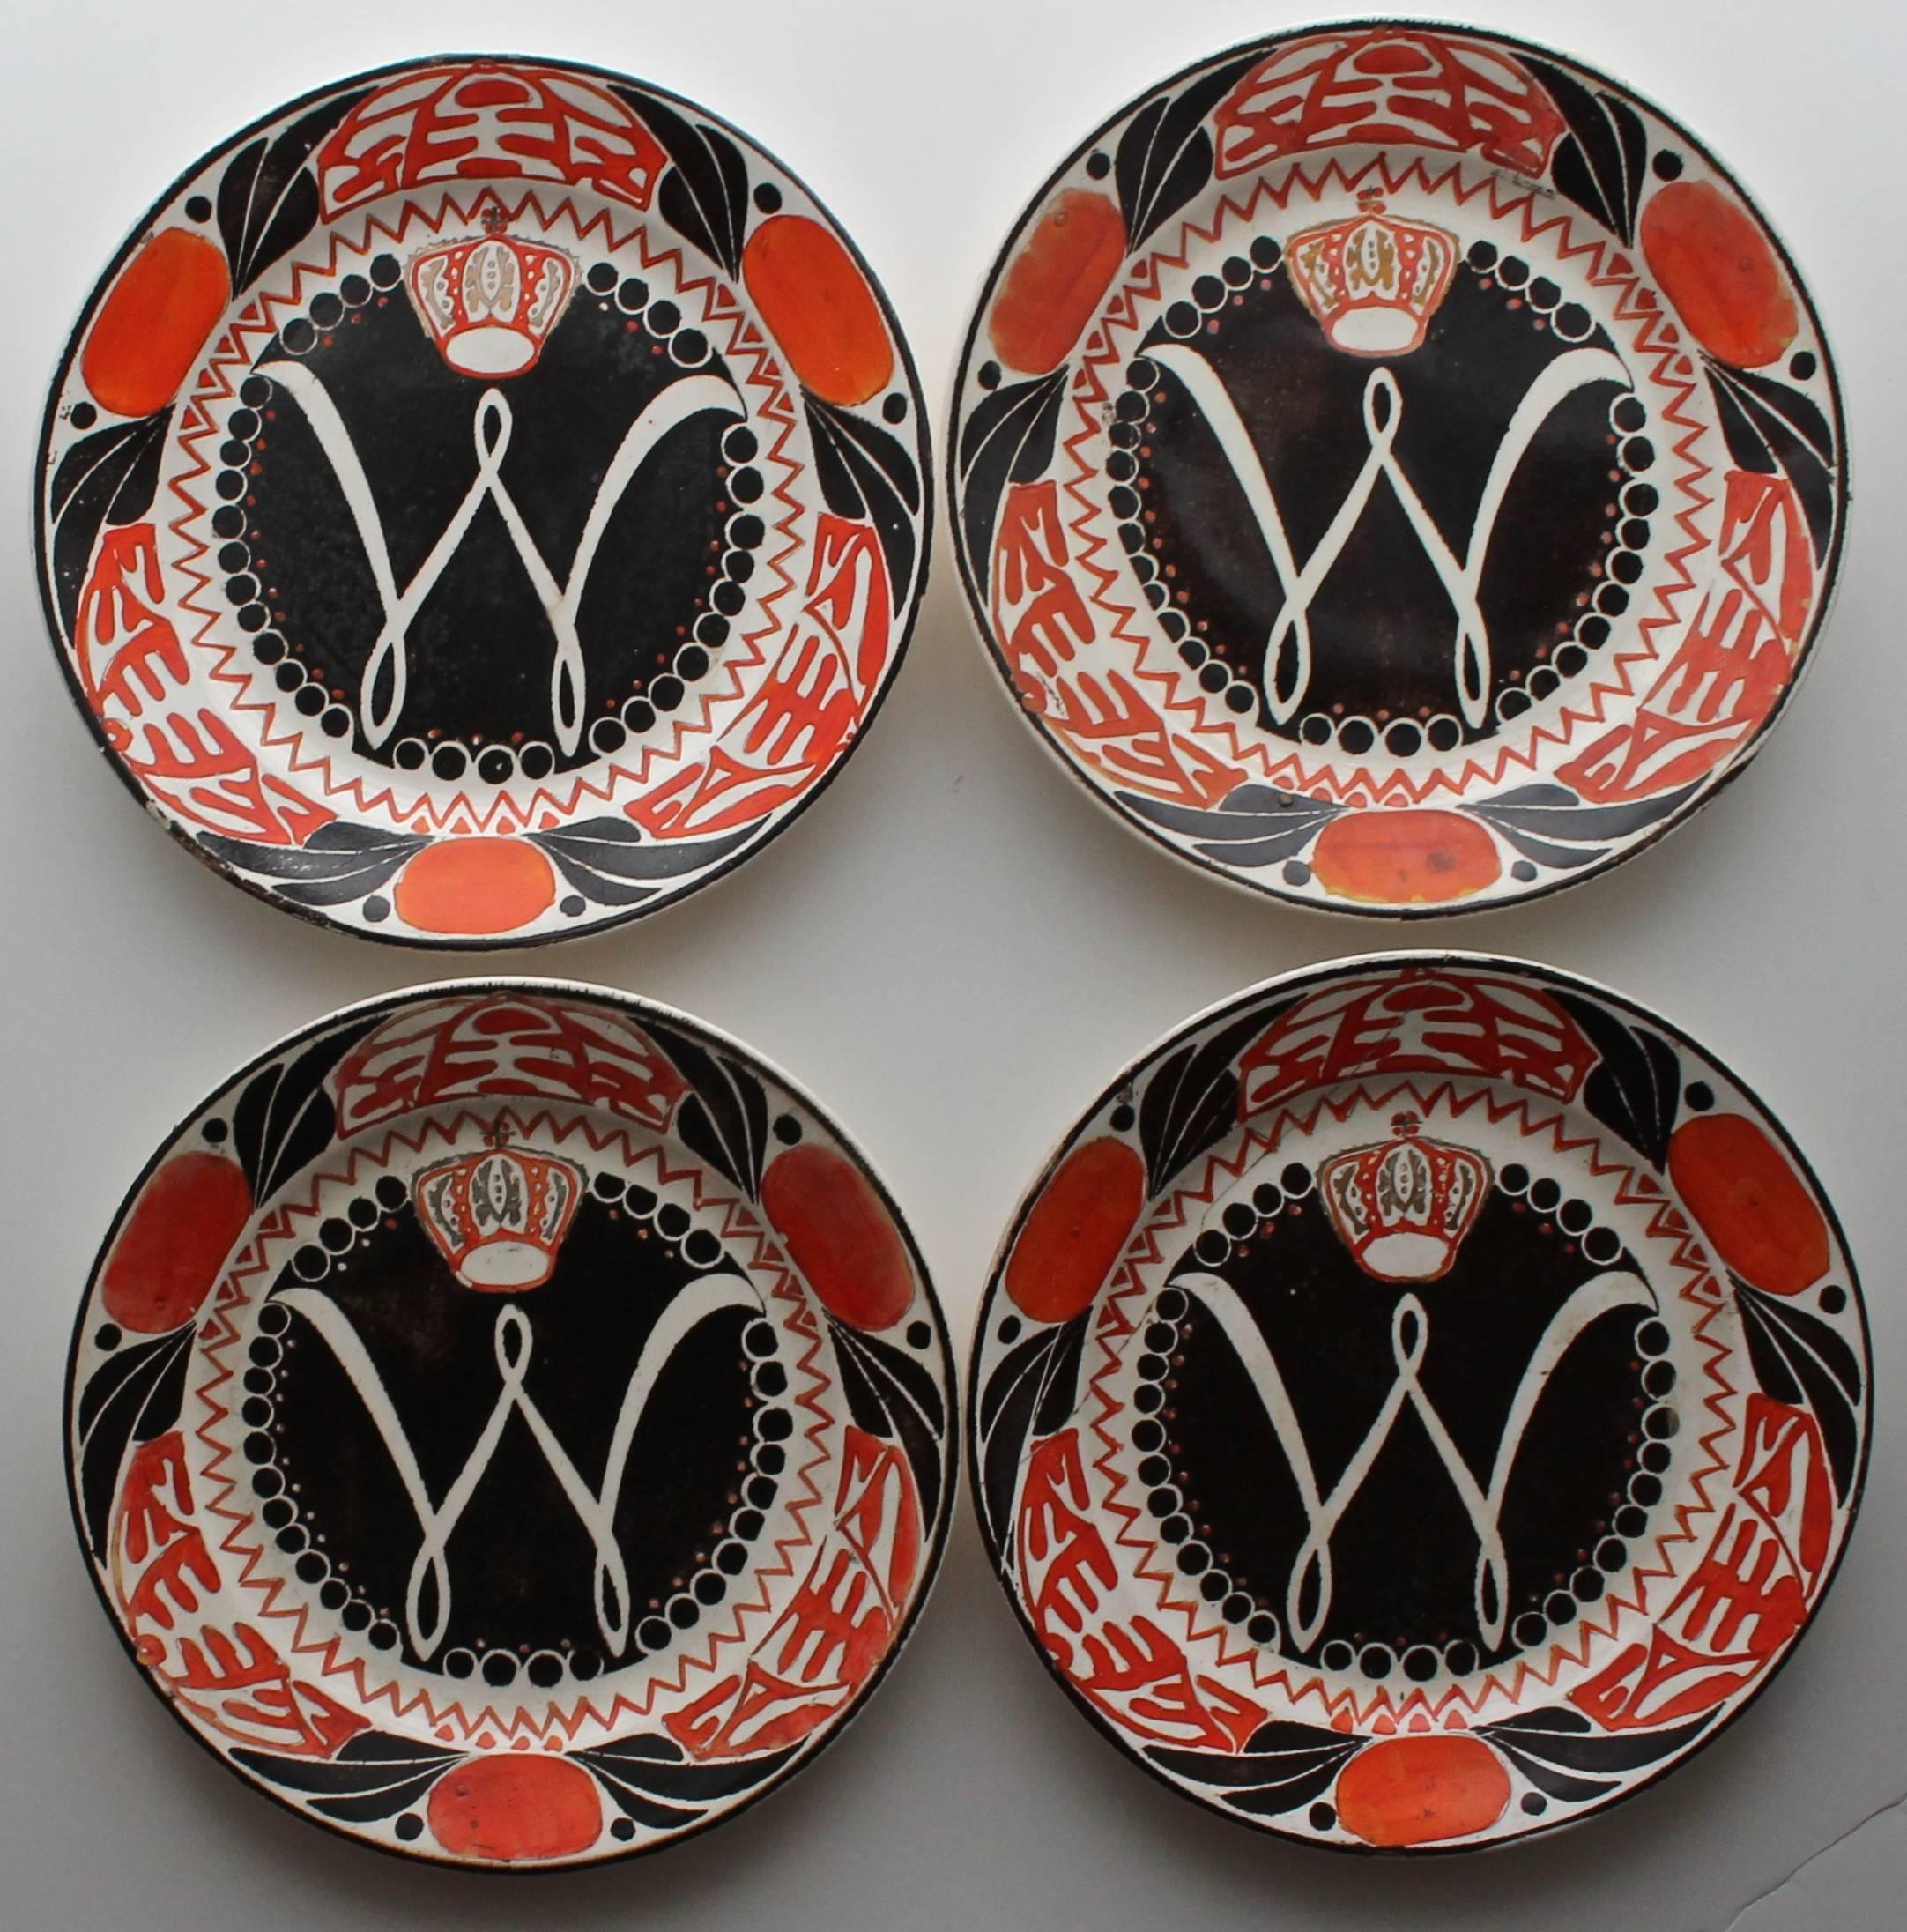 Offering four hand-painted Wilhelmina, “1890-1948” Inauguration plates, manufactured in 1898 by Petrus Regout & Co., Maastricht, Holland.